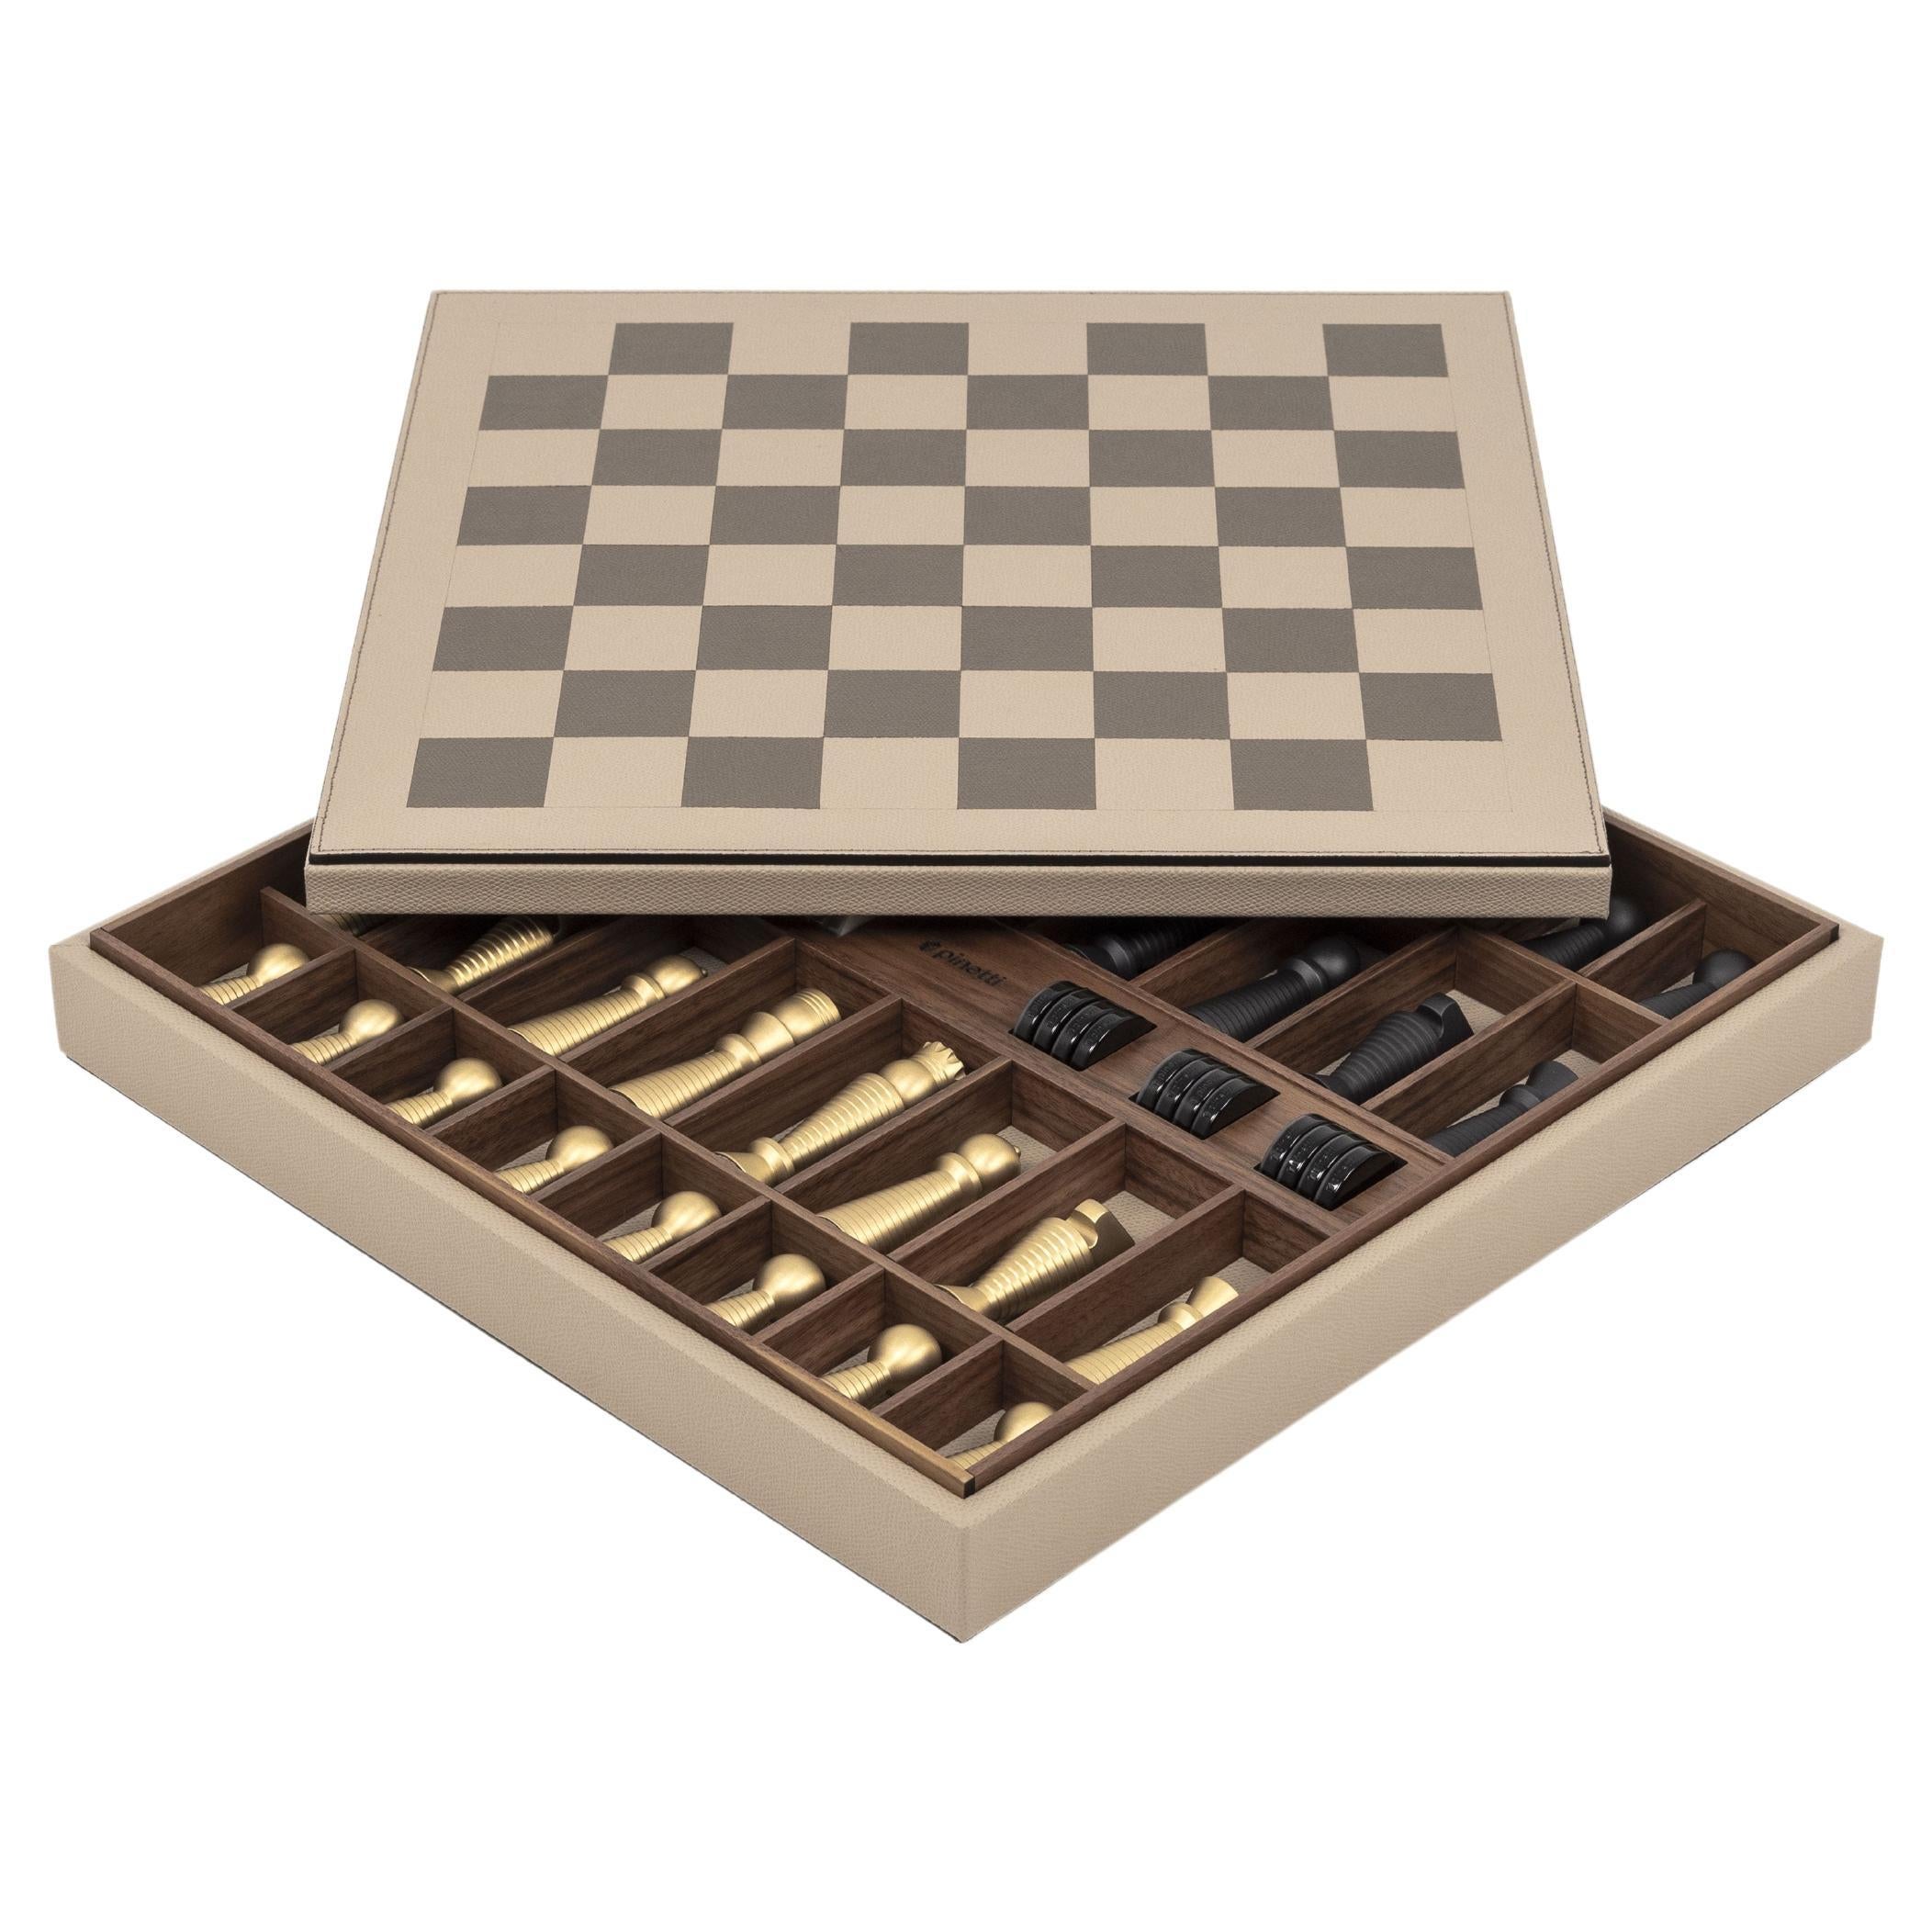 21st Century Italian Leather Chess Board with Brass Pieces Handcrafted in Italy For Sale